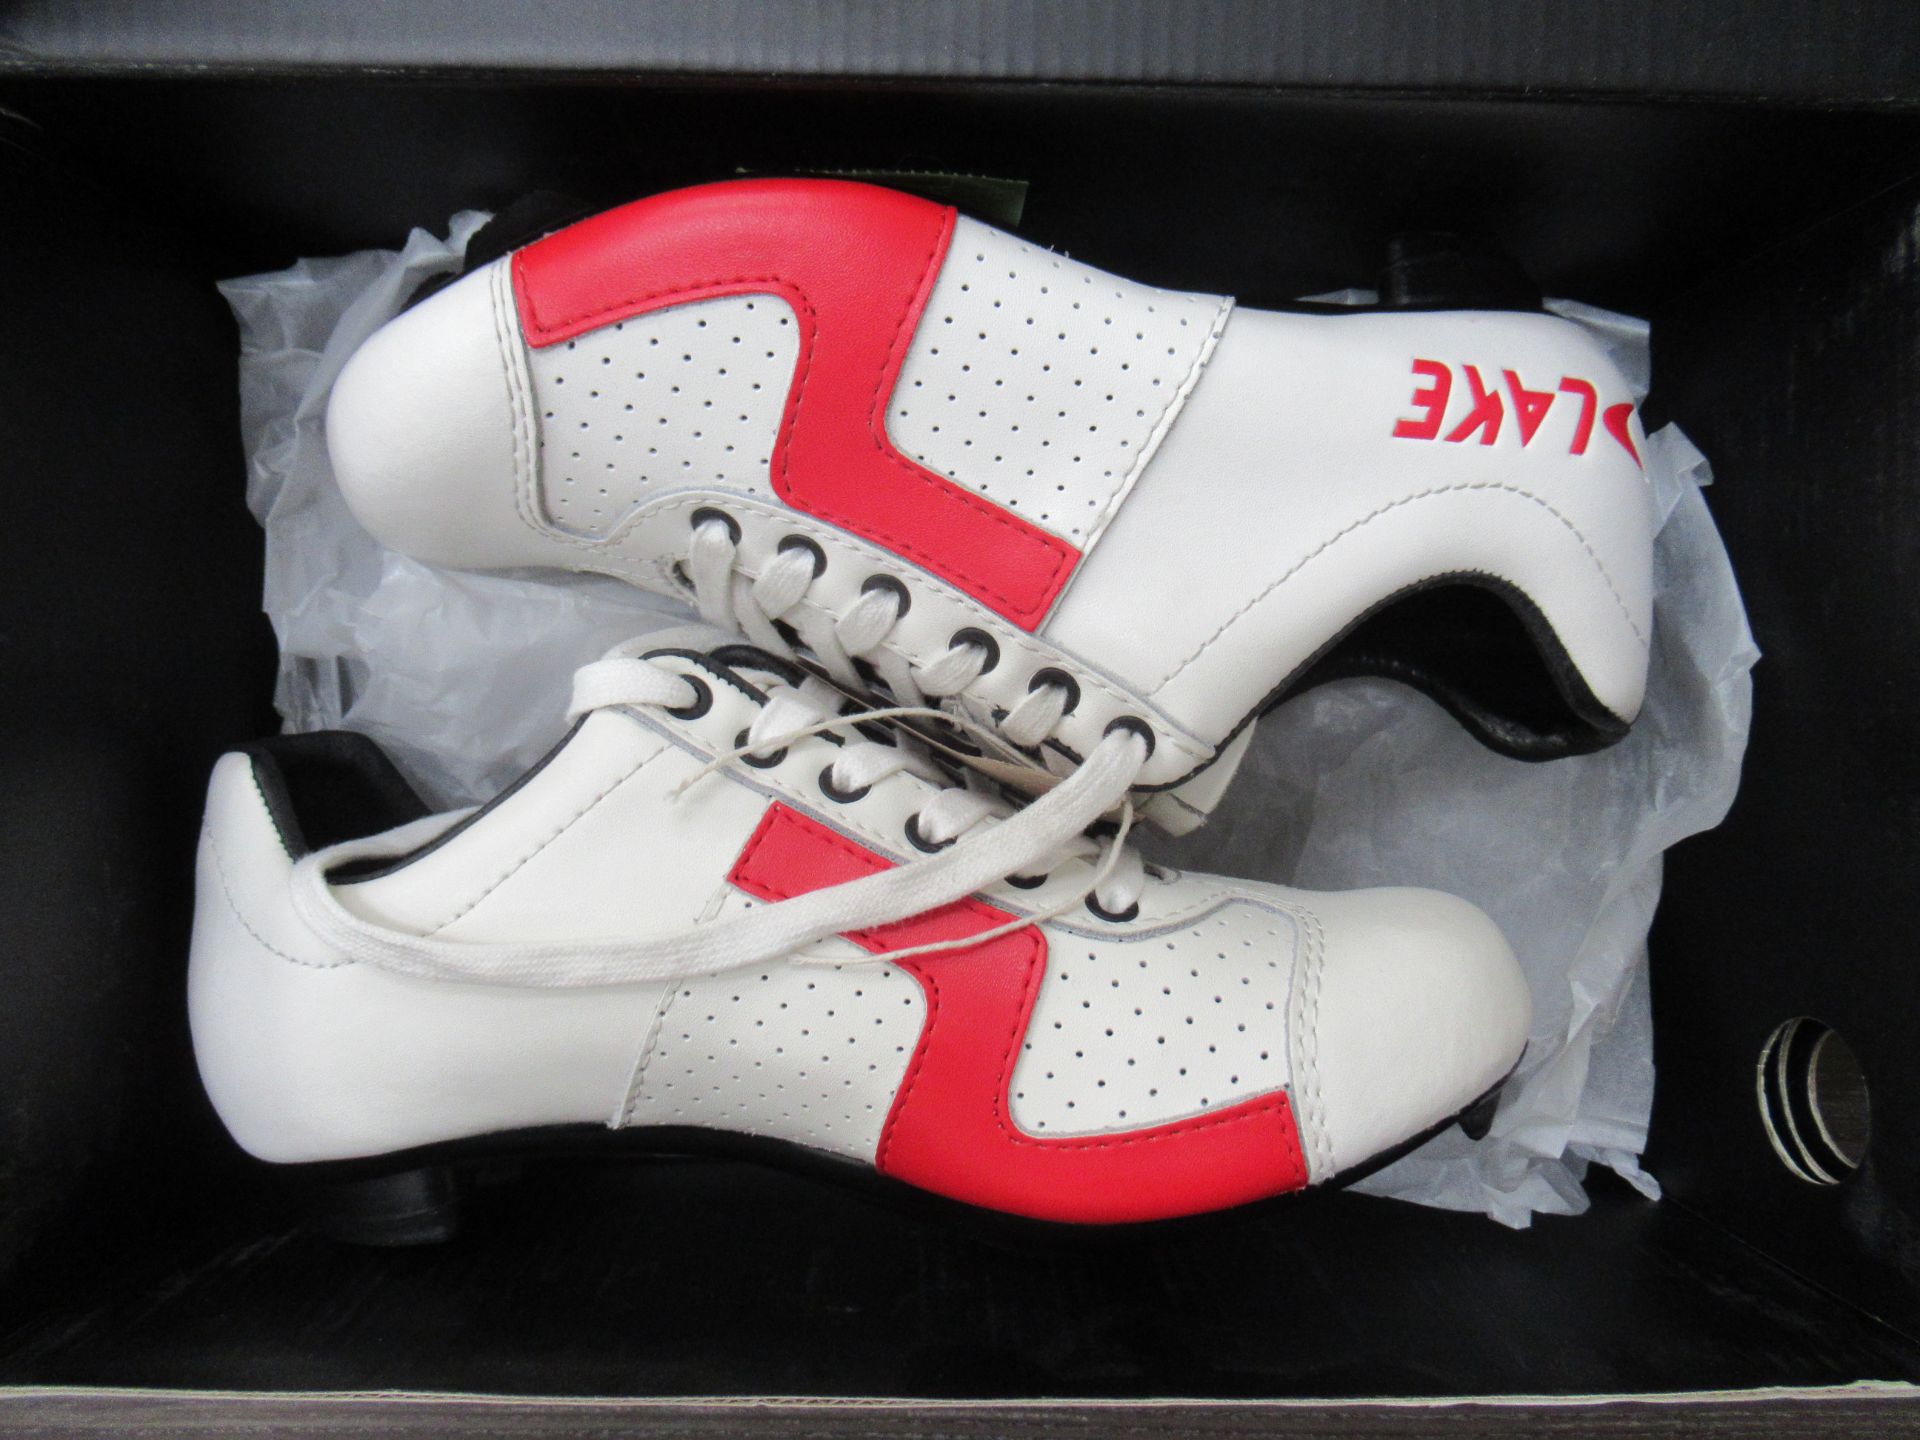 Pair of Lake CX1 cycling shoes (white/red) - boxed EU size 38 (RRP£110) - Image 4 of 4